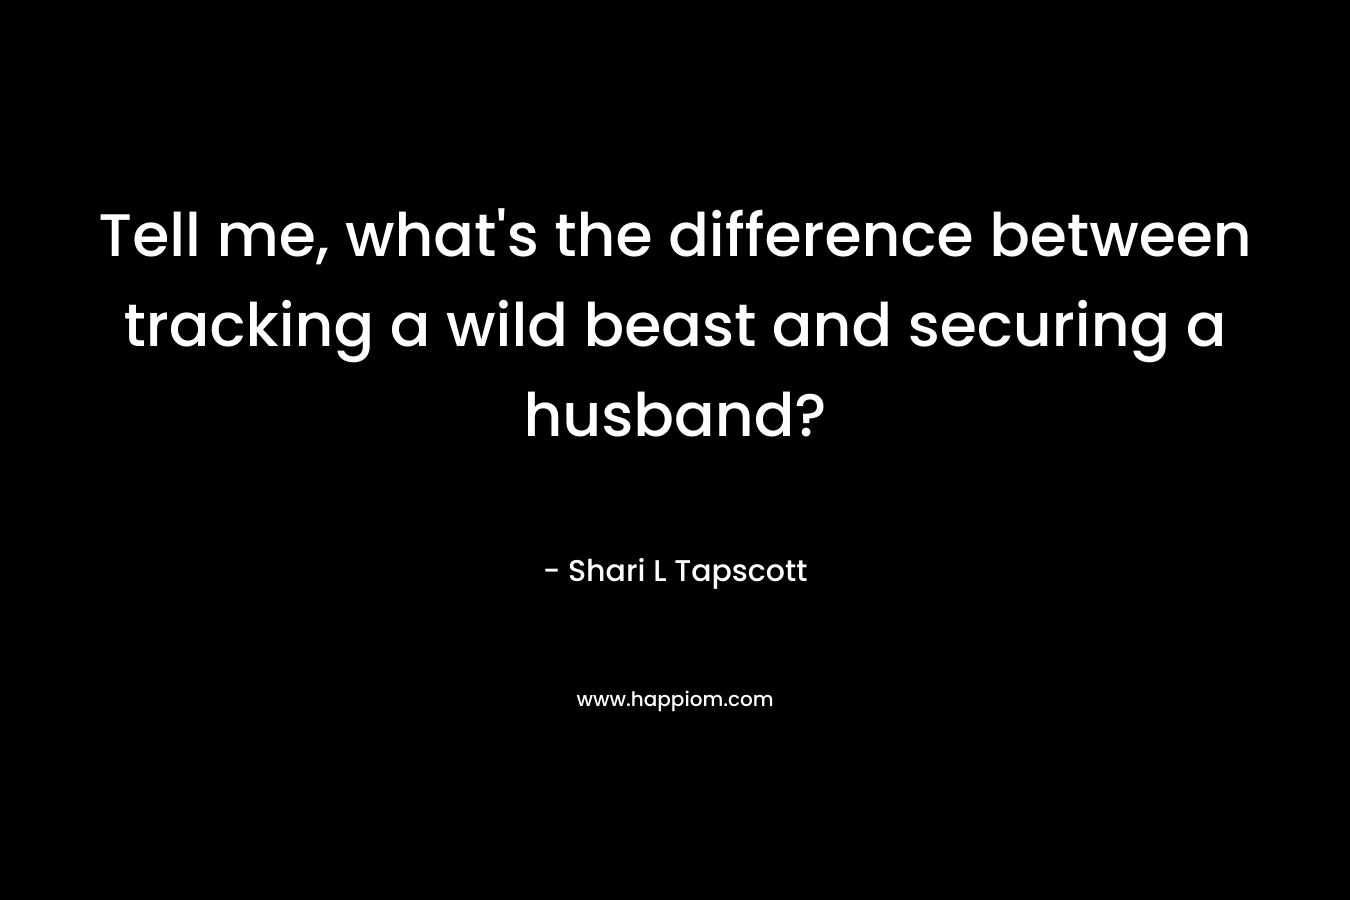 Tell me, what's the difference between tracking a wild beast and securing a husband?